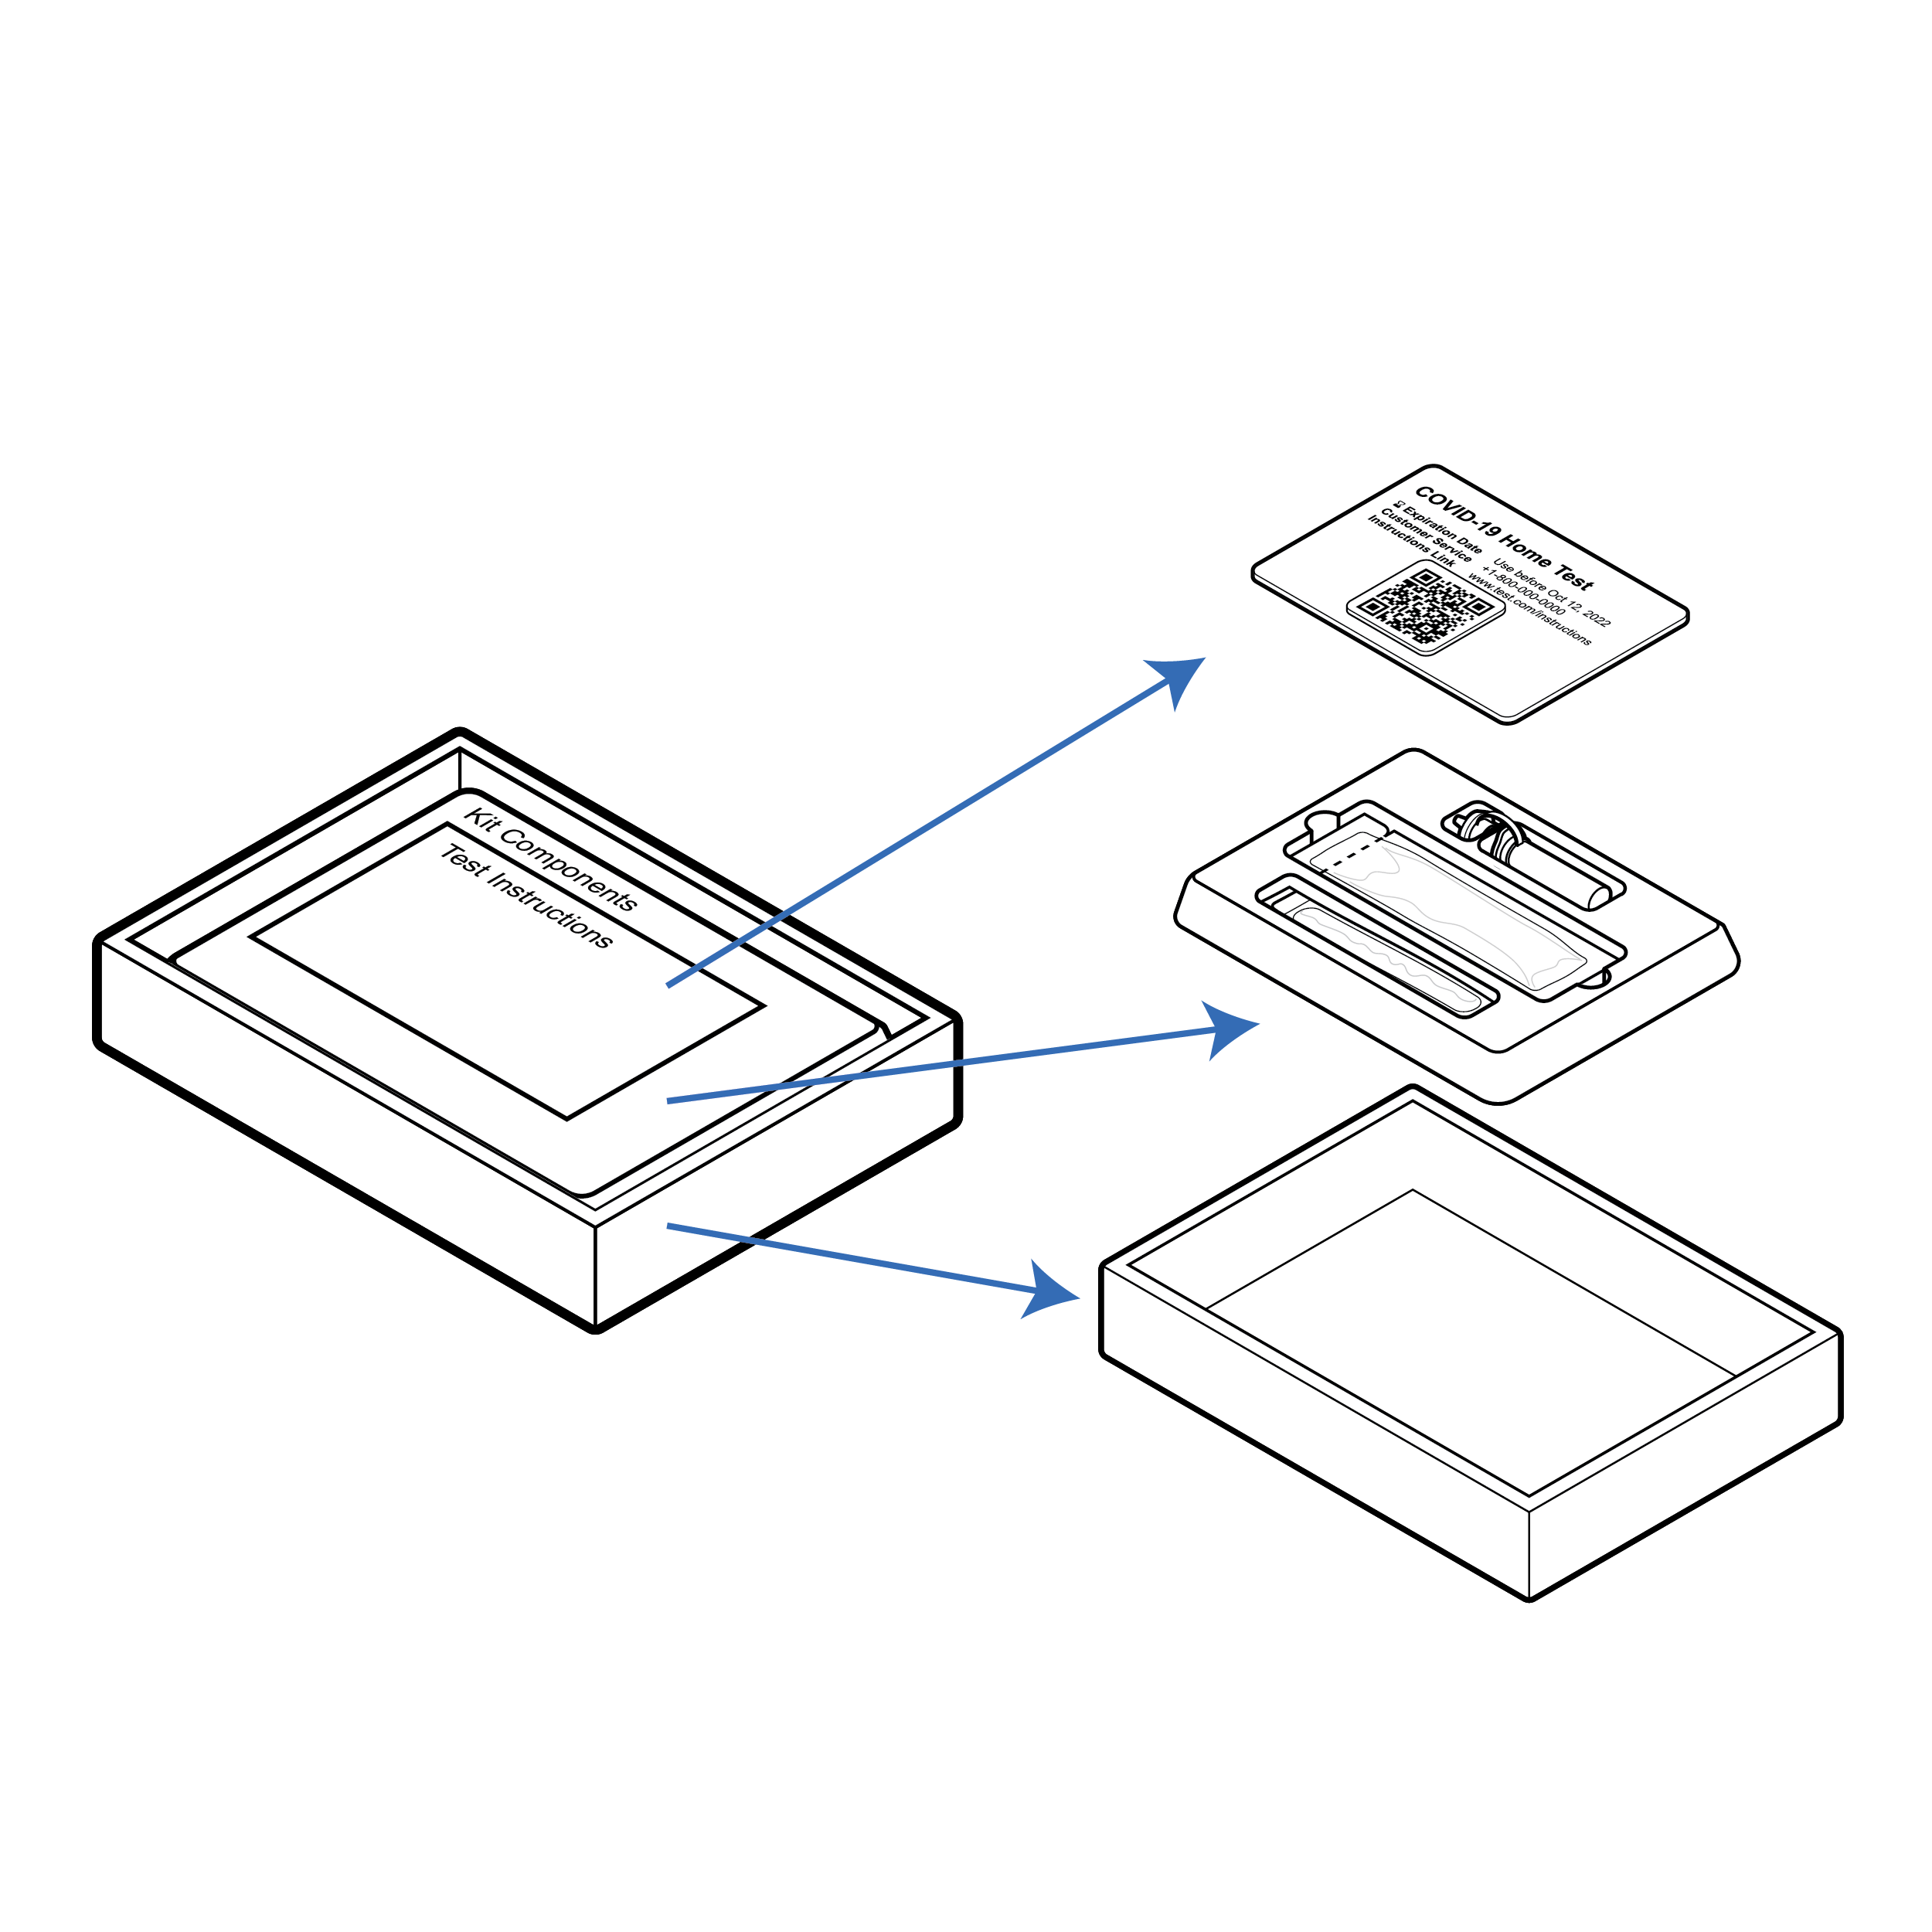 Test instructions with illustration of a test kit, with individual components assembled in box.